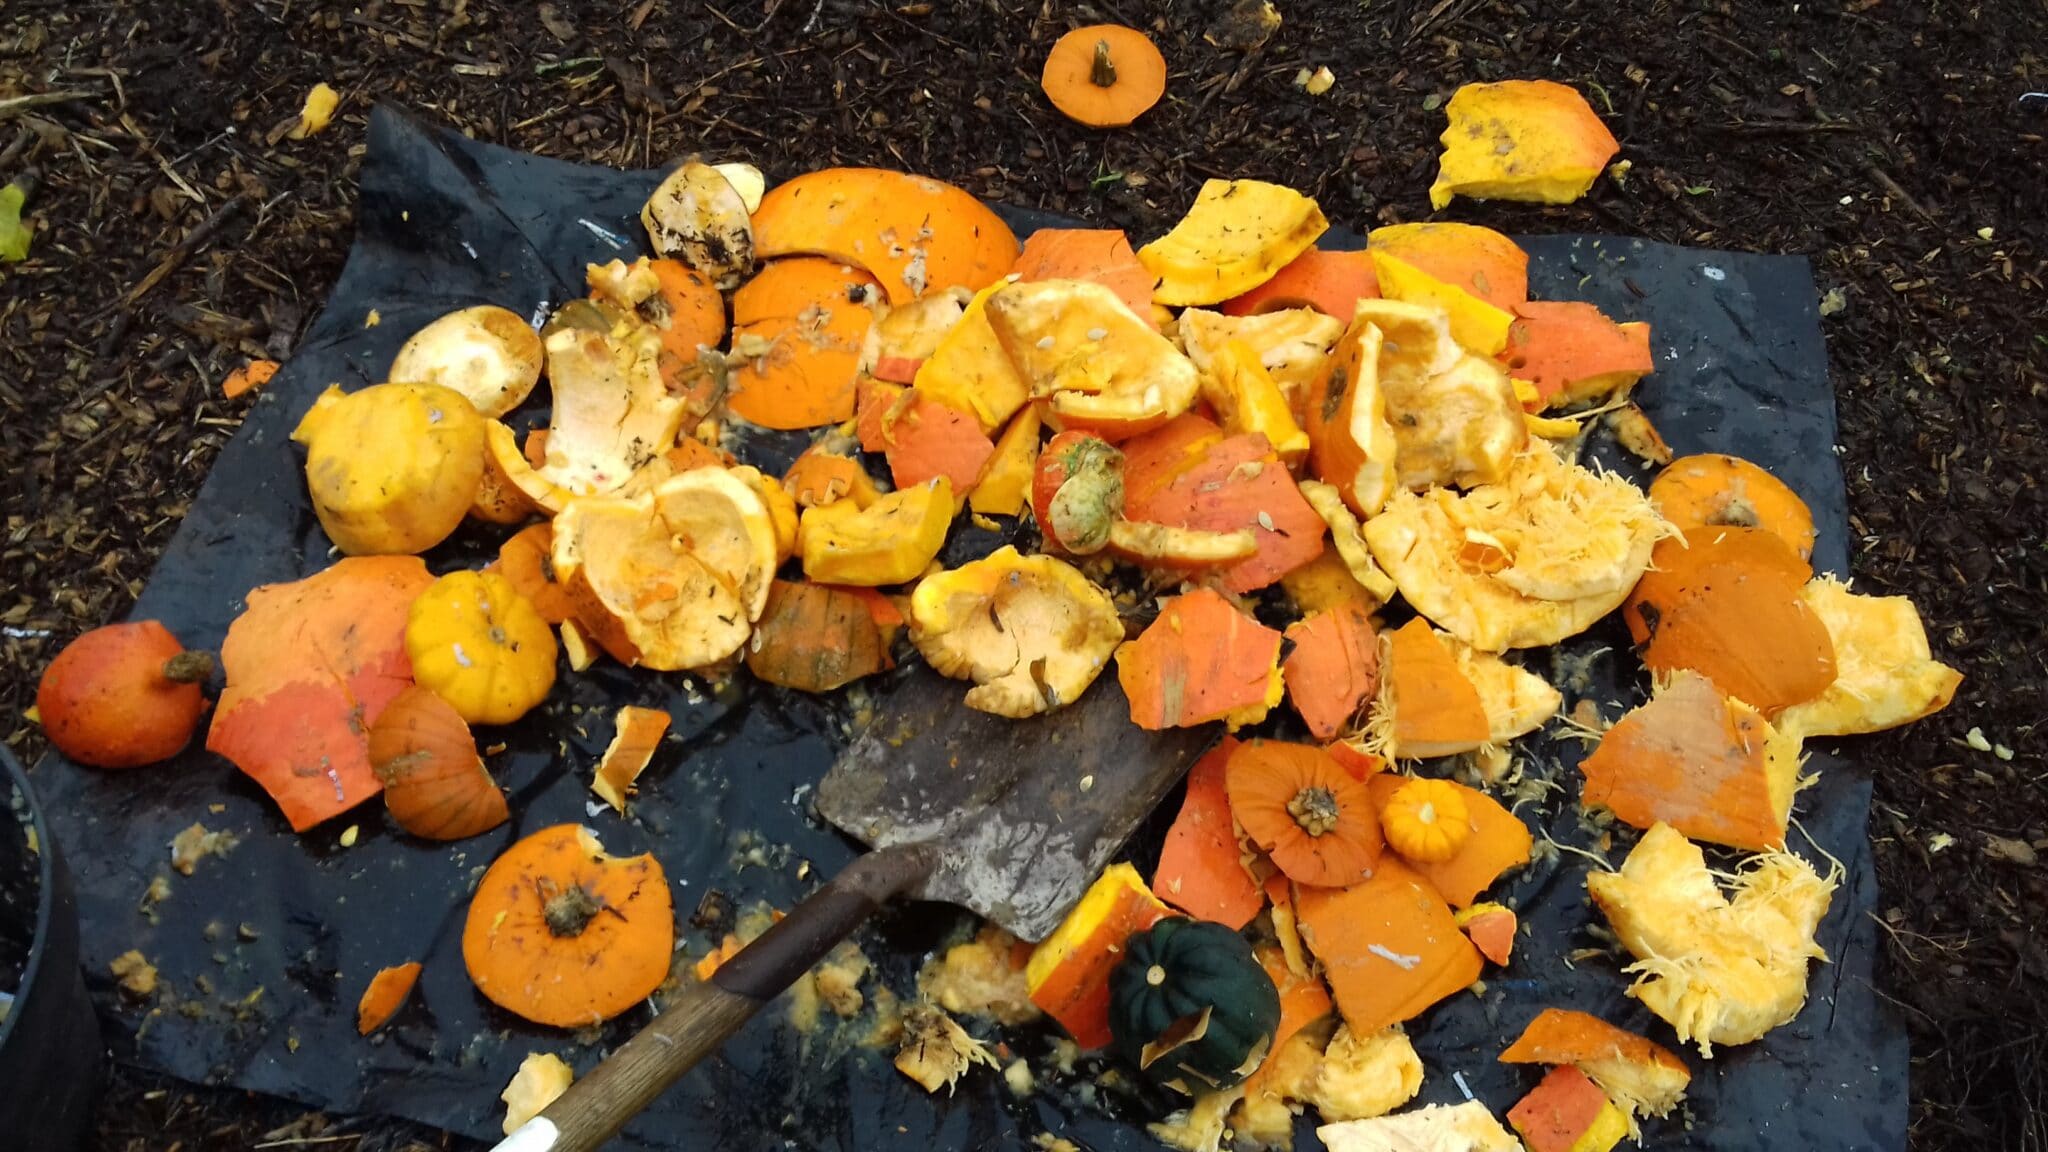 Pumpkin compost (Source: Carry on Composting)